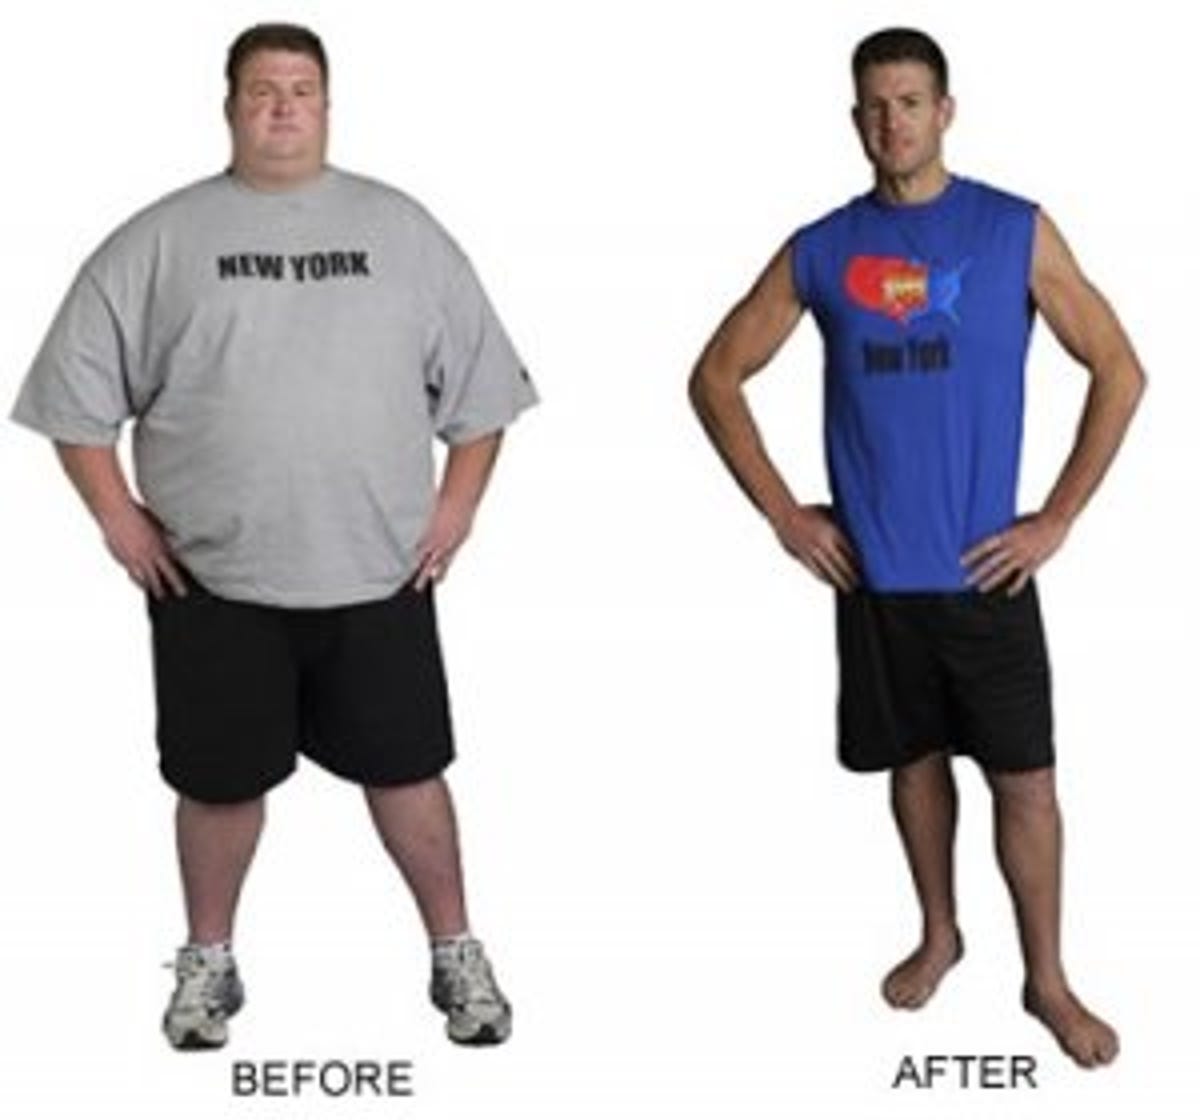 Eric Chopin of "The Biggest Loser"